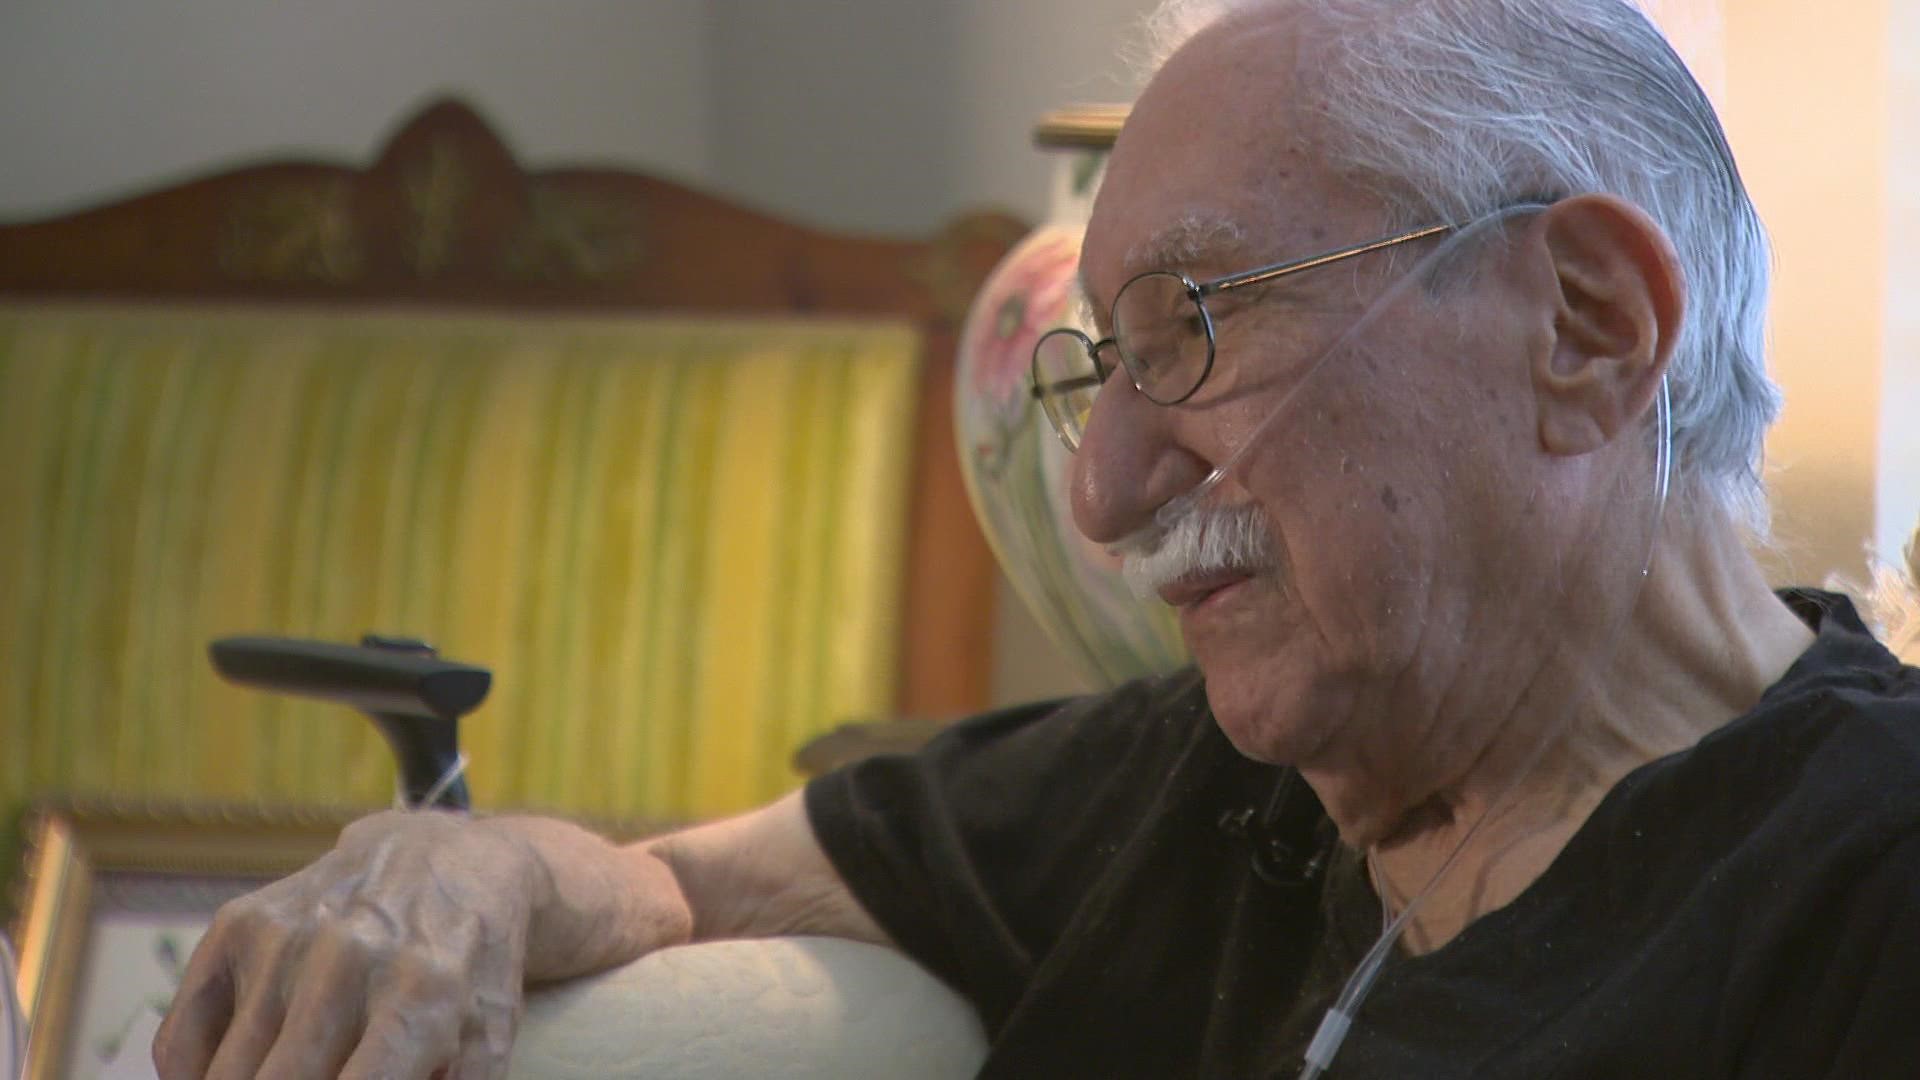 More doctors are prescribing their patients the antiviral drug Paxlovid. An 88-year-old in San Antonio says it helped lessen symptoms from other illnesses.